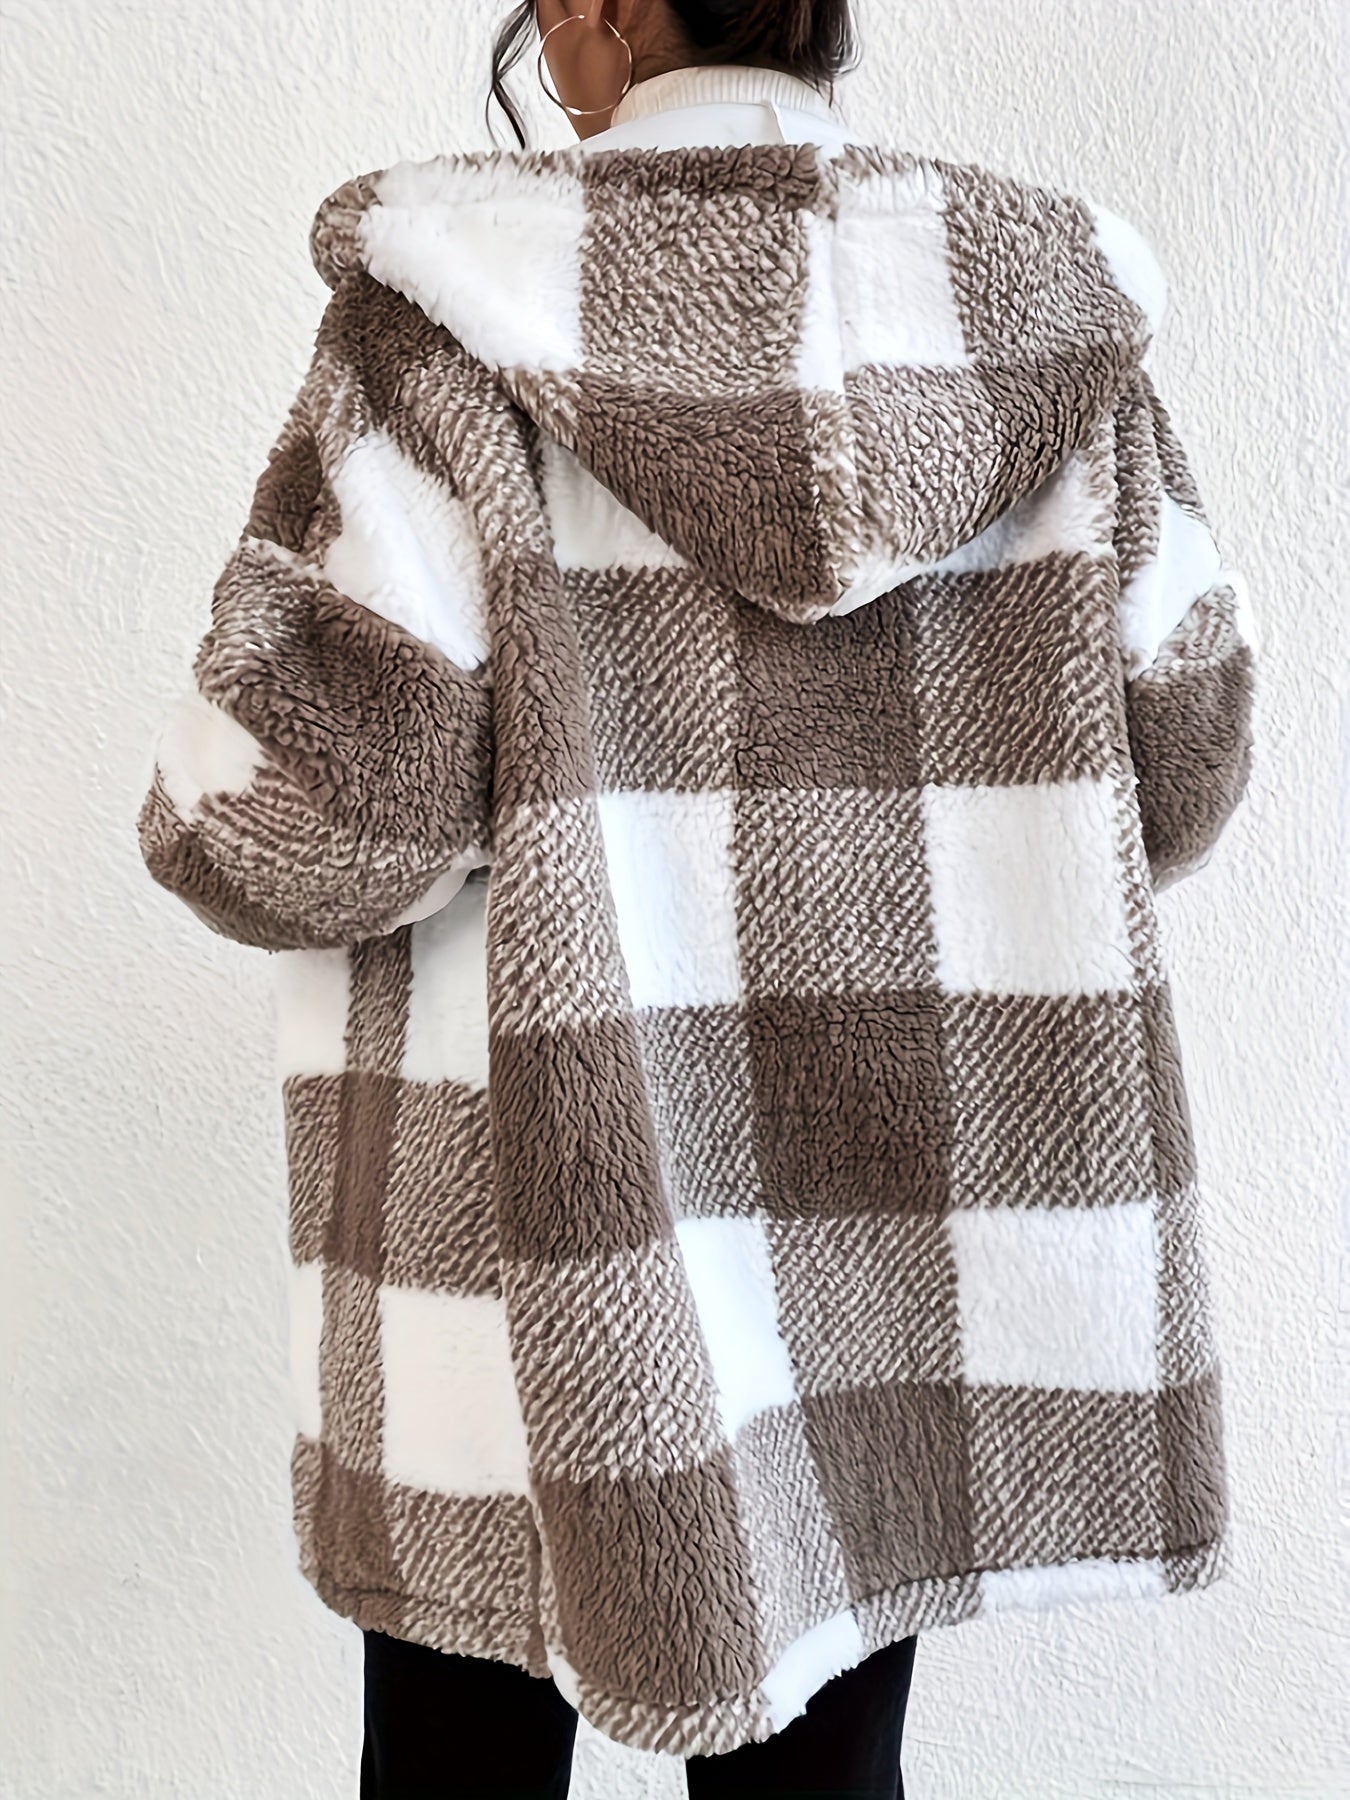 Plaid Print Teddy Hooded Jacket, Casual Zip Up Drawstring Outerwear, Women's Clothing